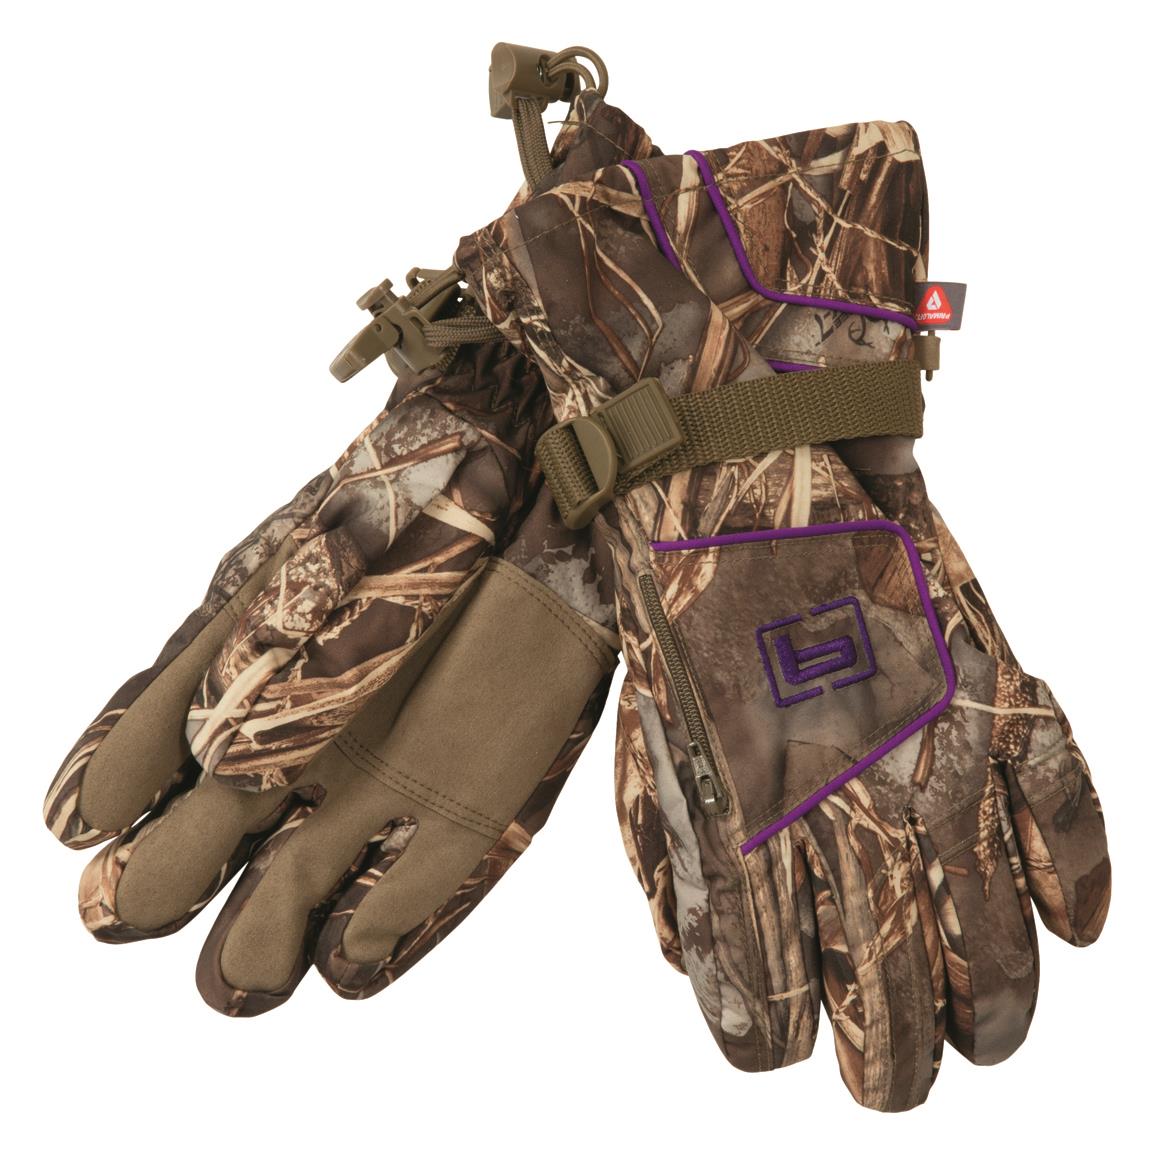 Banded Men's White River Waterproof Insulated Gloves, Max 7